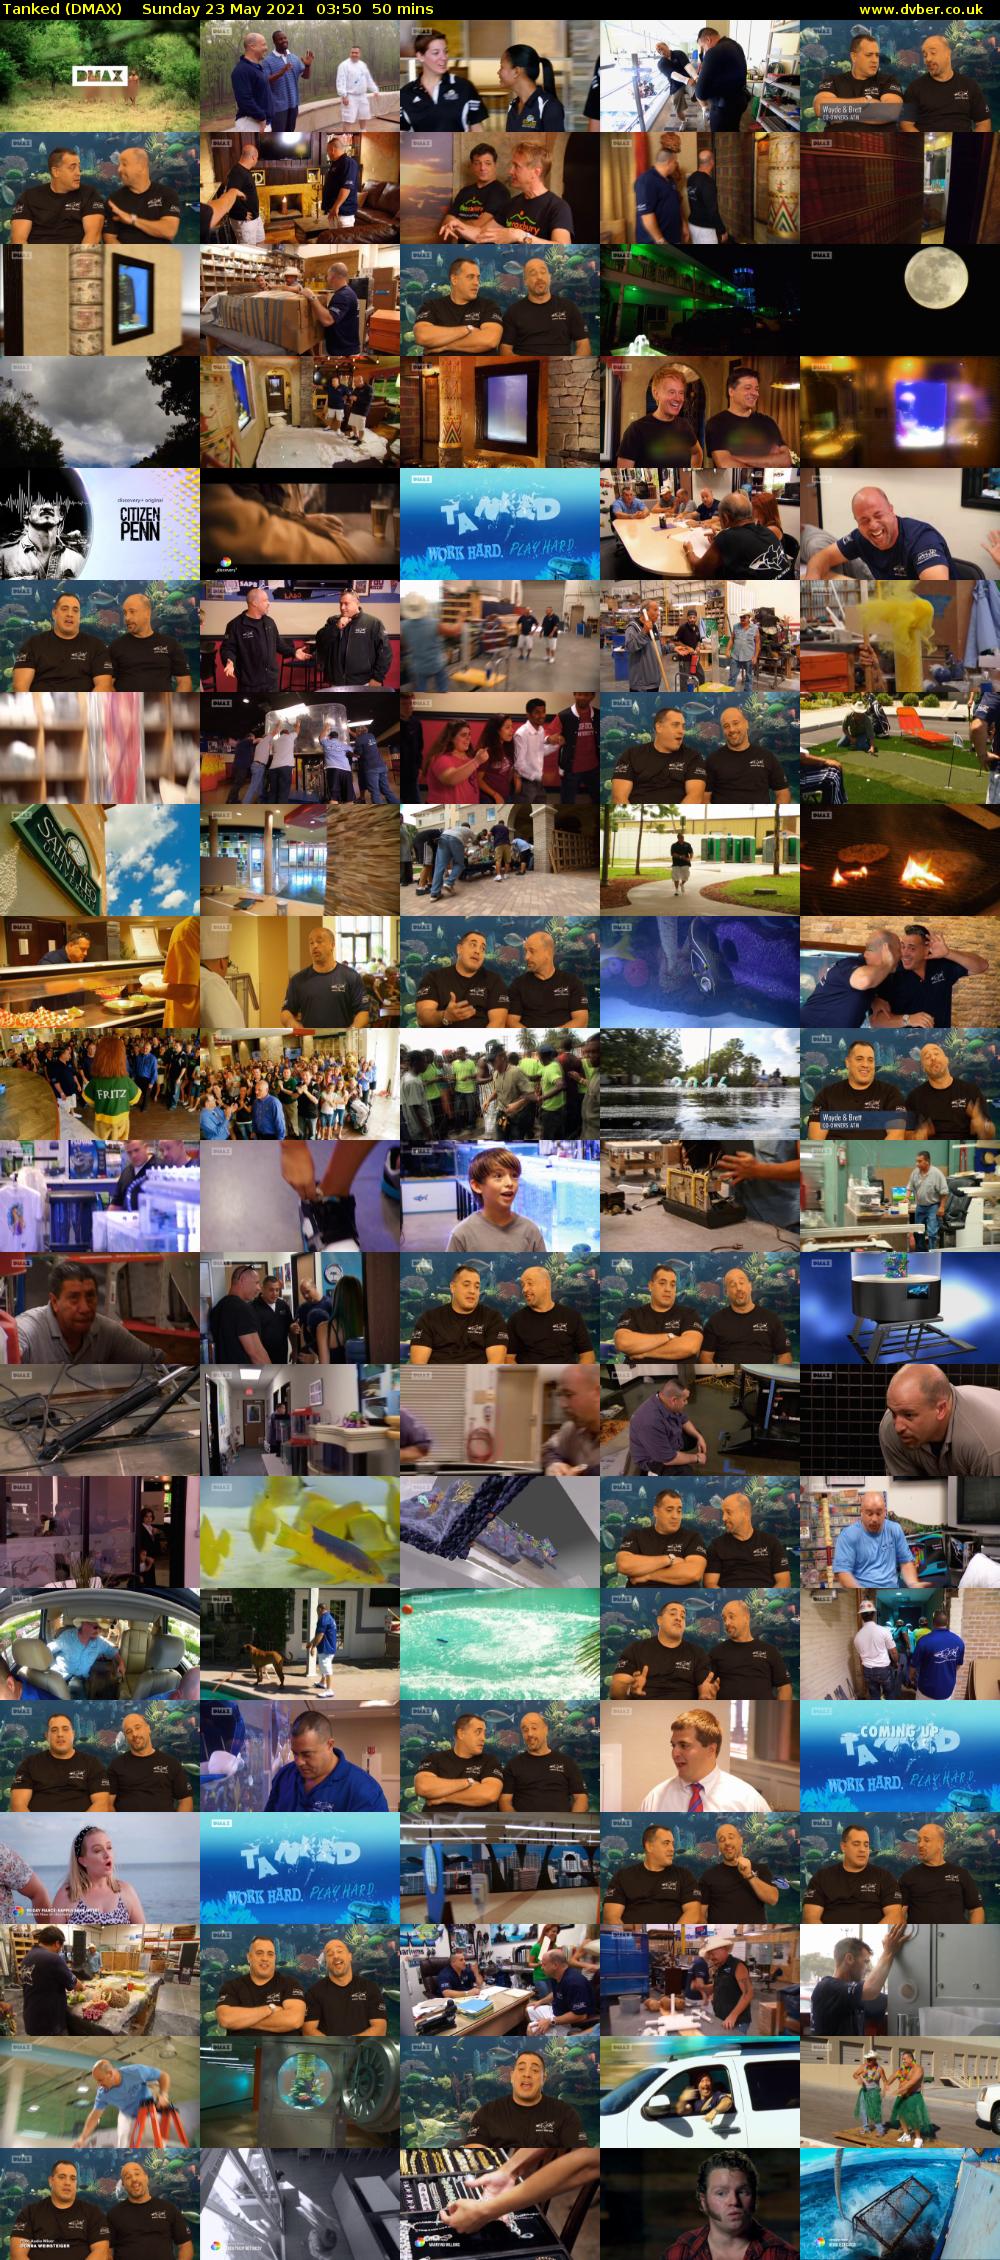 Tanked (DMAX) Sunday 23 May 2021 03:50 - 04:40